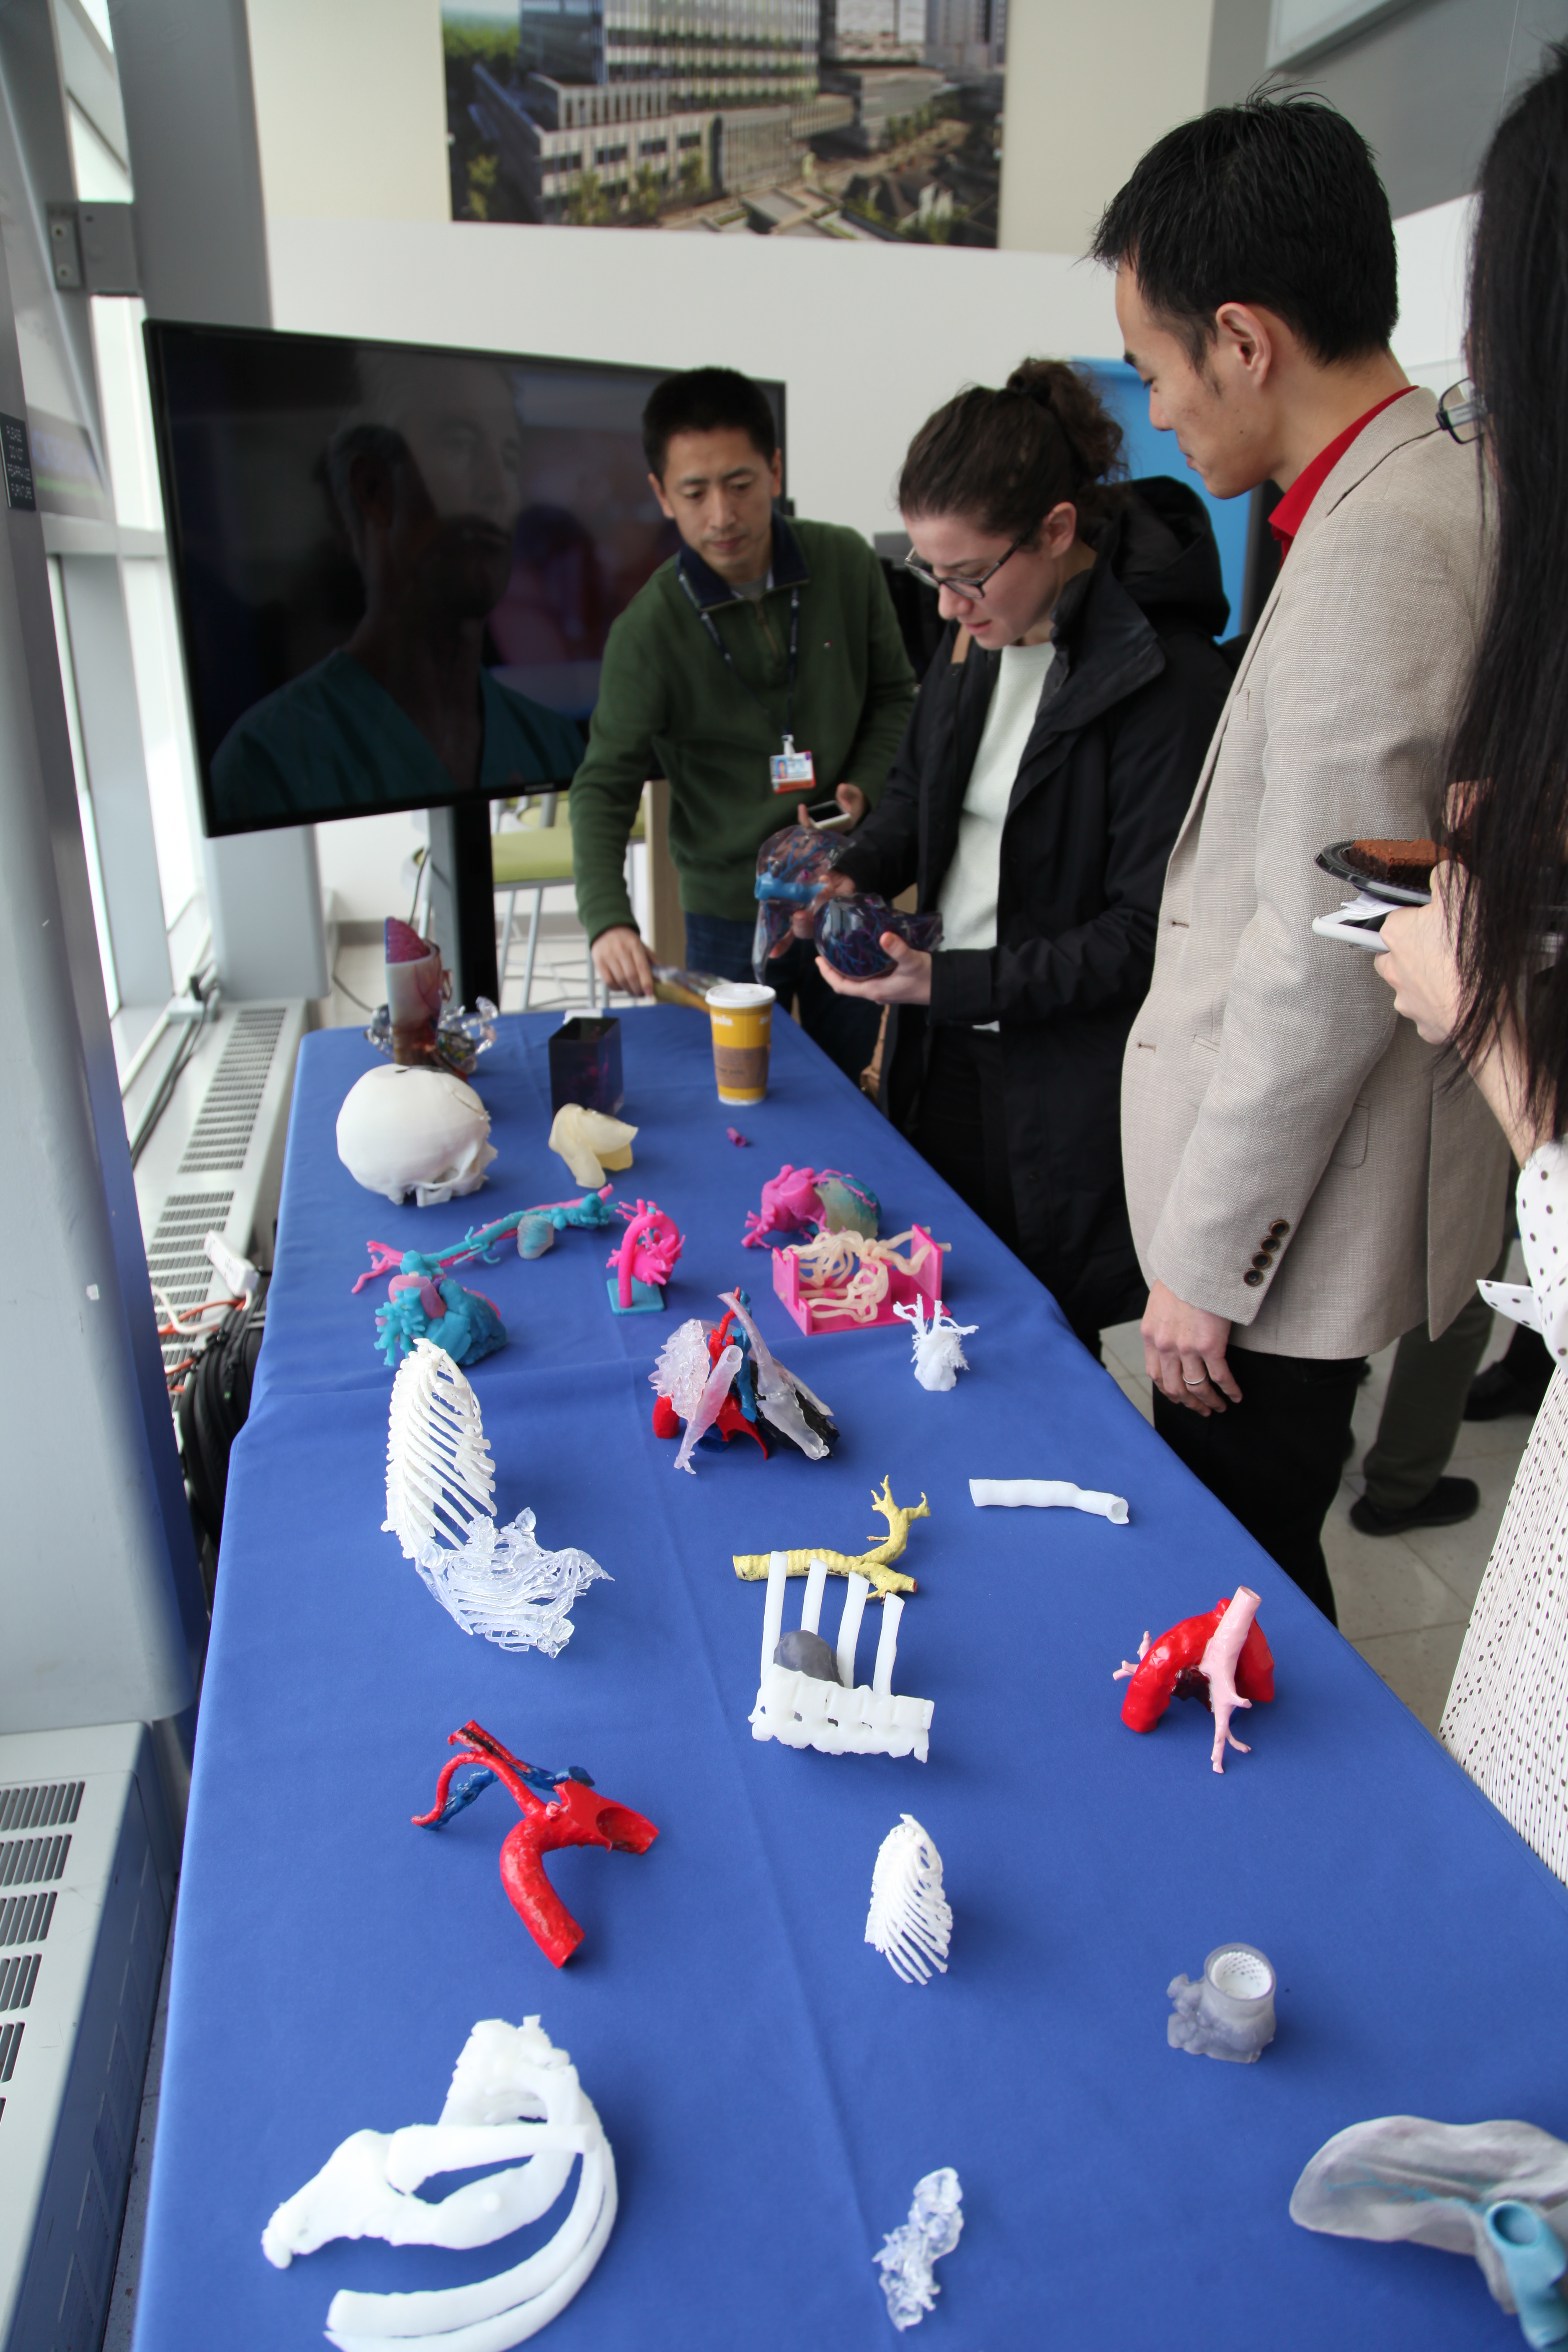 3-D Printing in Healthcare Fair attendees take a look at 3-D printed models after the event.